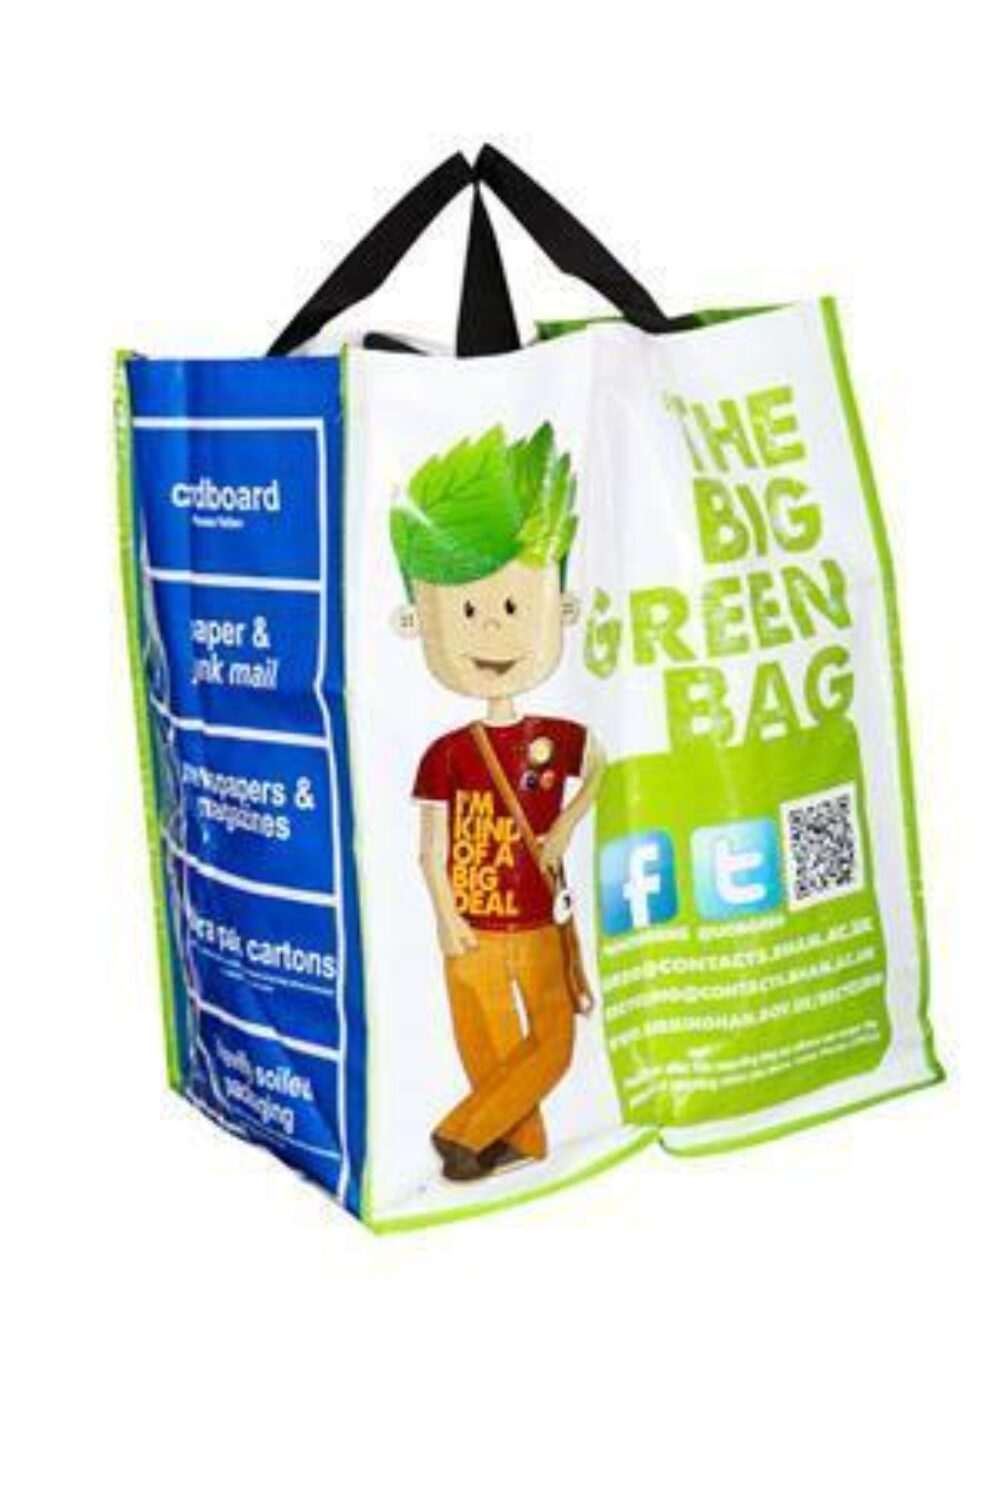 Bespoke Recycling Bags Encourage Students to Recycle